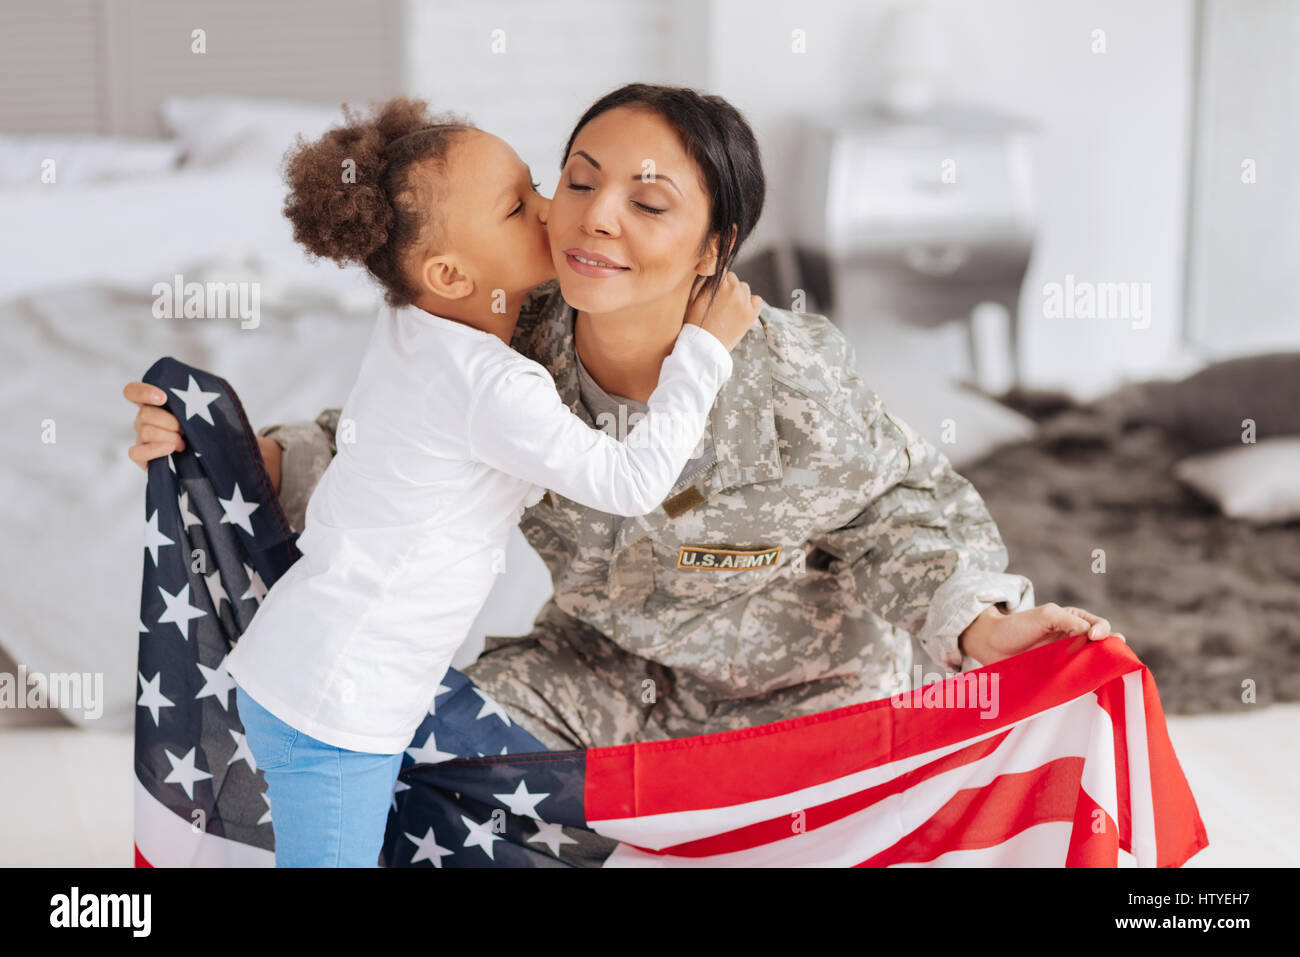 Patriotic young lady happy being home Stock Photo